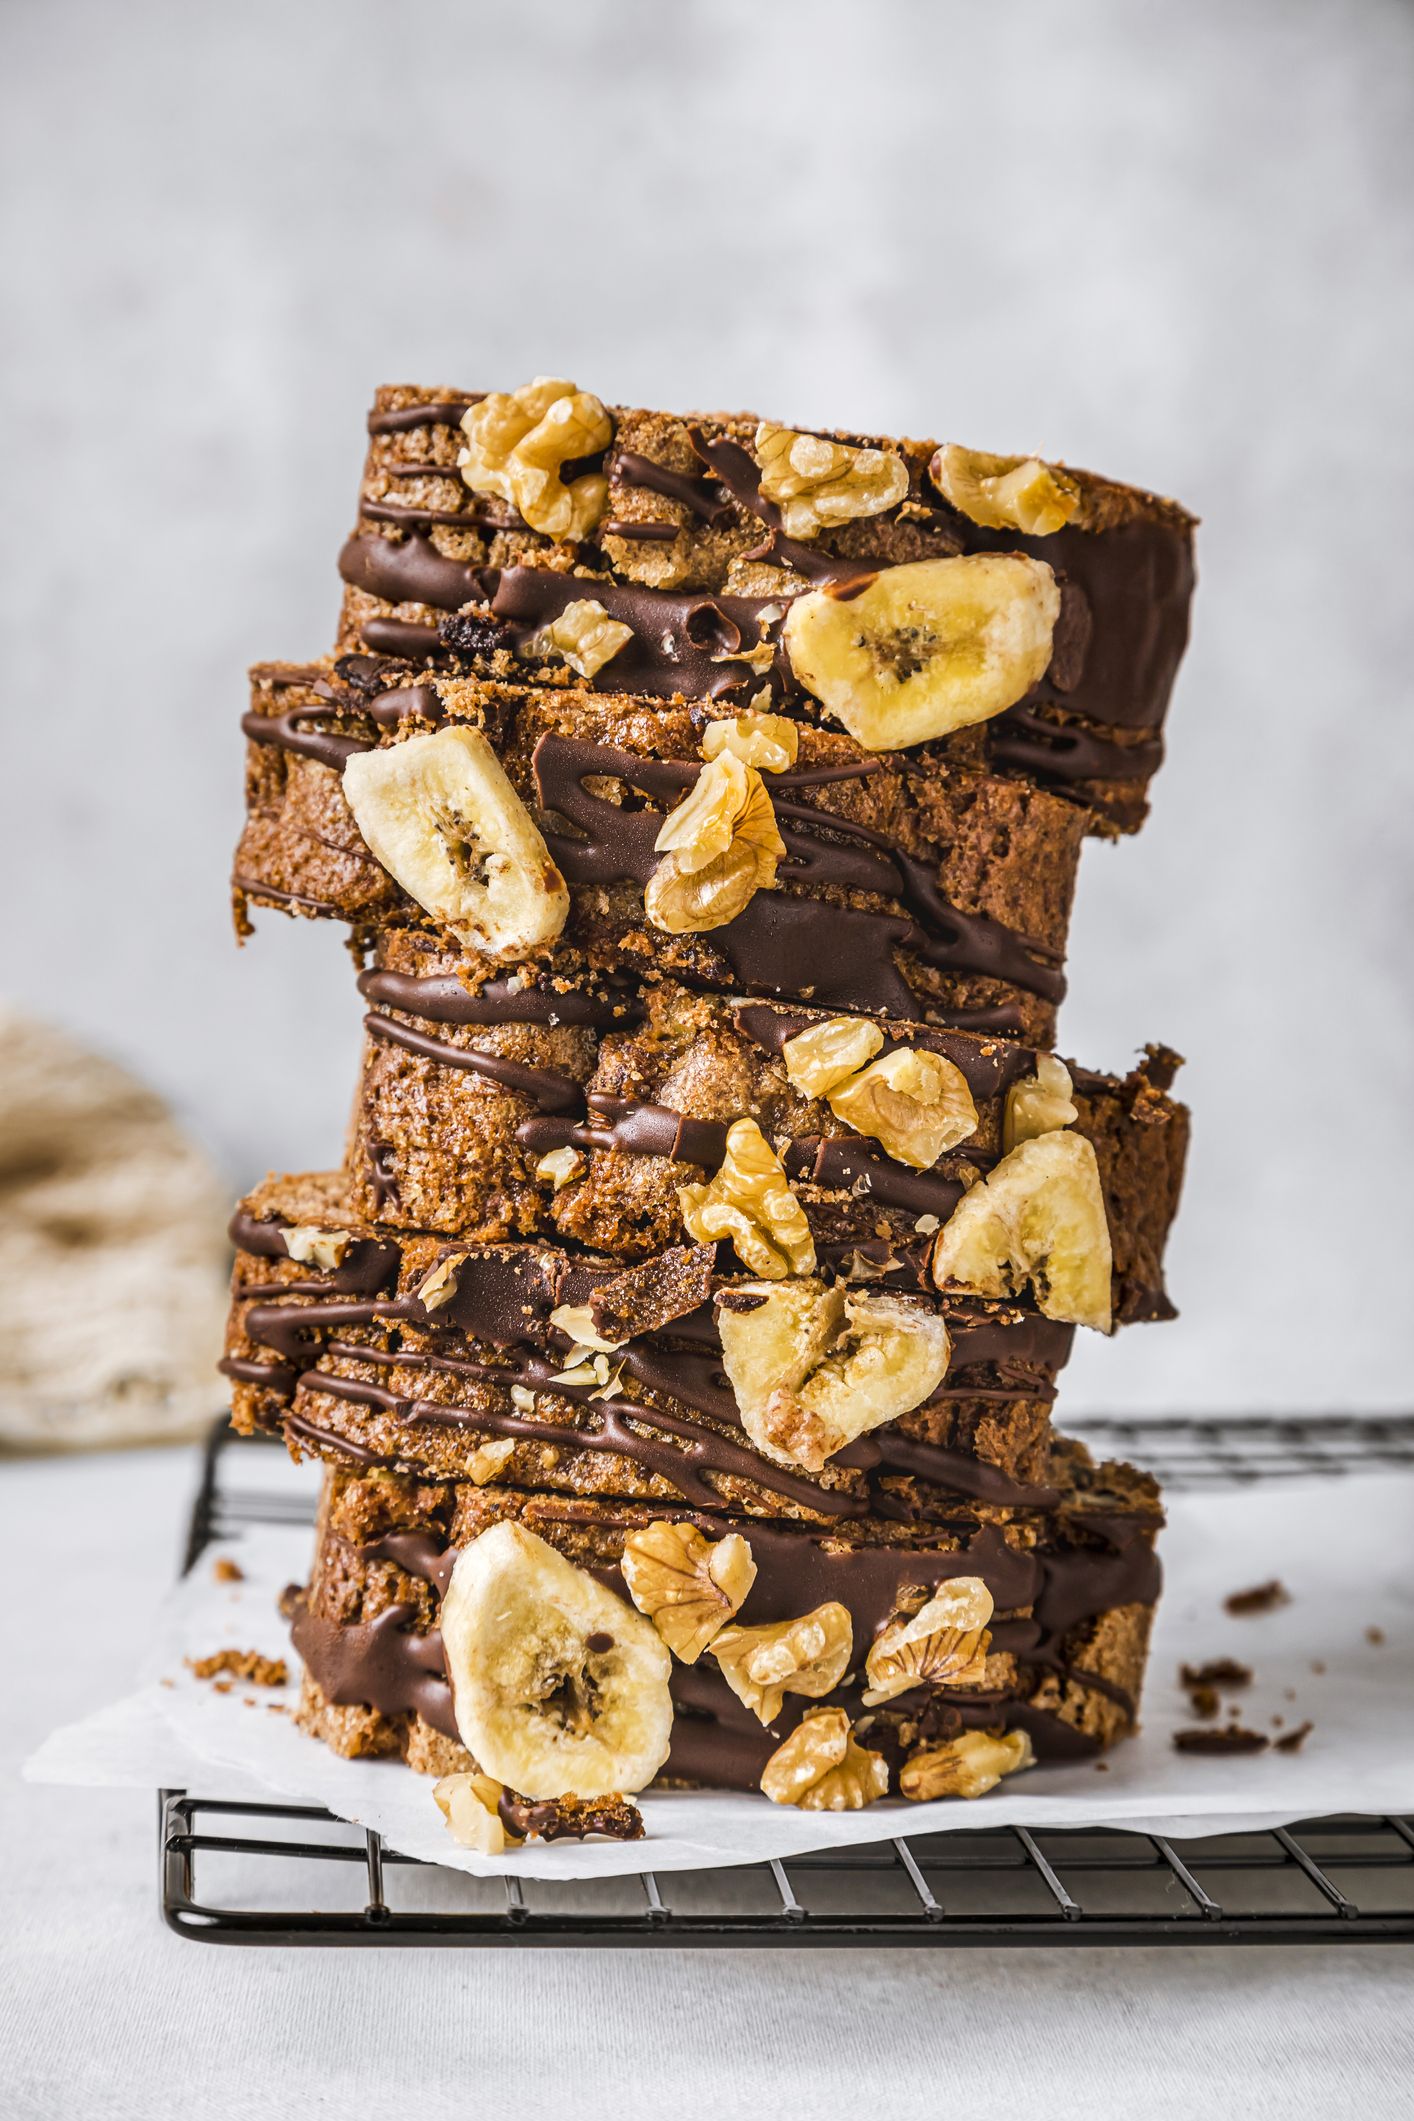 https://hips.hearstapps.com/hmg-prod/images/sliced-banana-cake-with-walnuts-and-chocolate-sauce-royalty-free-image-1678127658.jpg